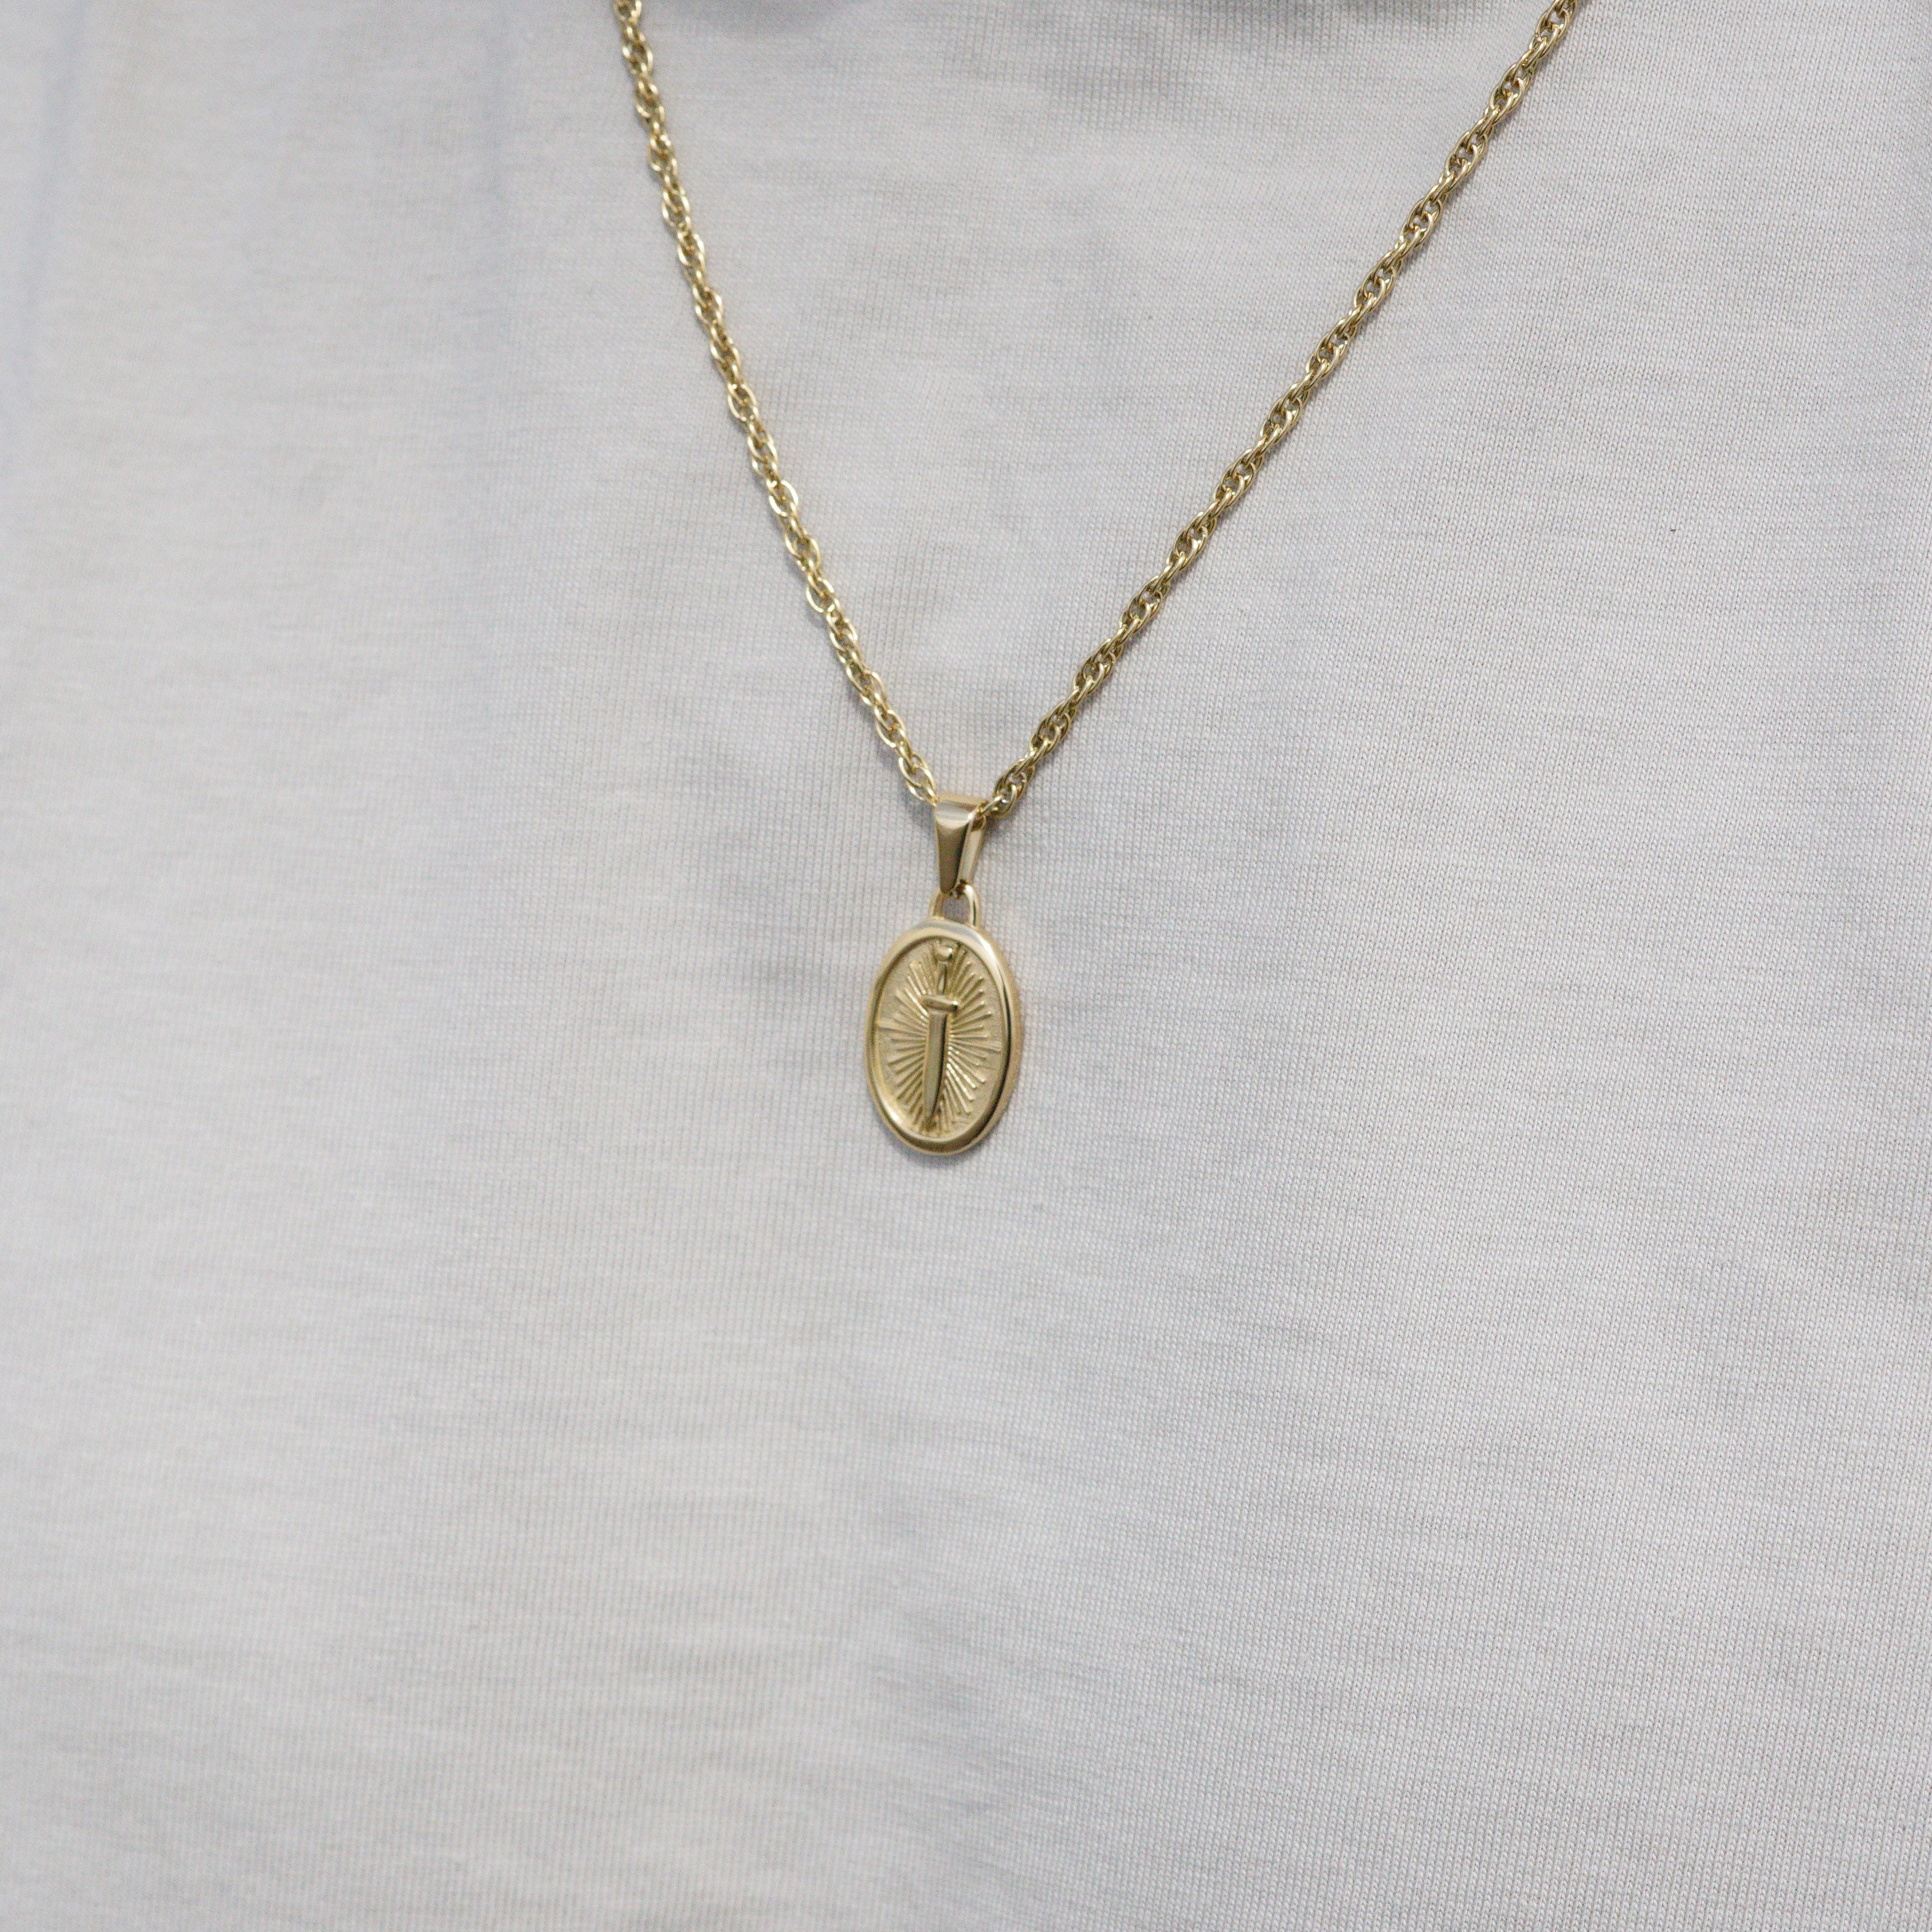 SWORD NECKLACE - GOLD TONE